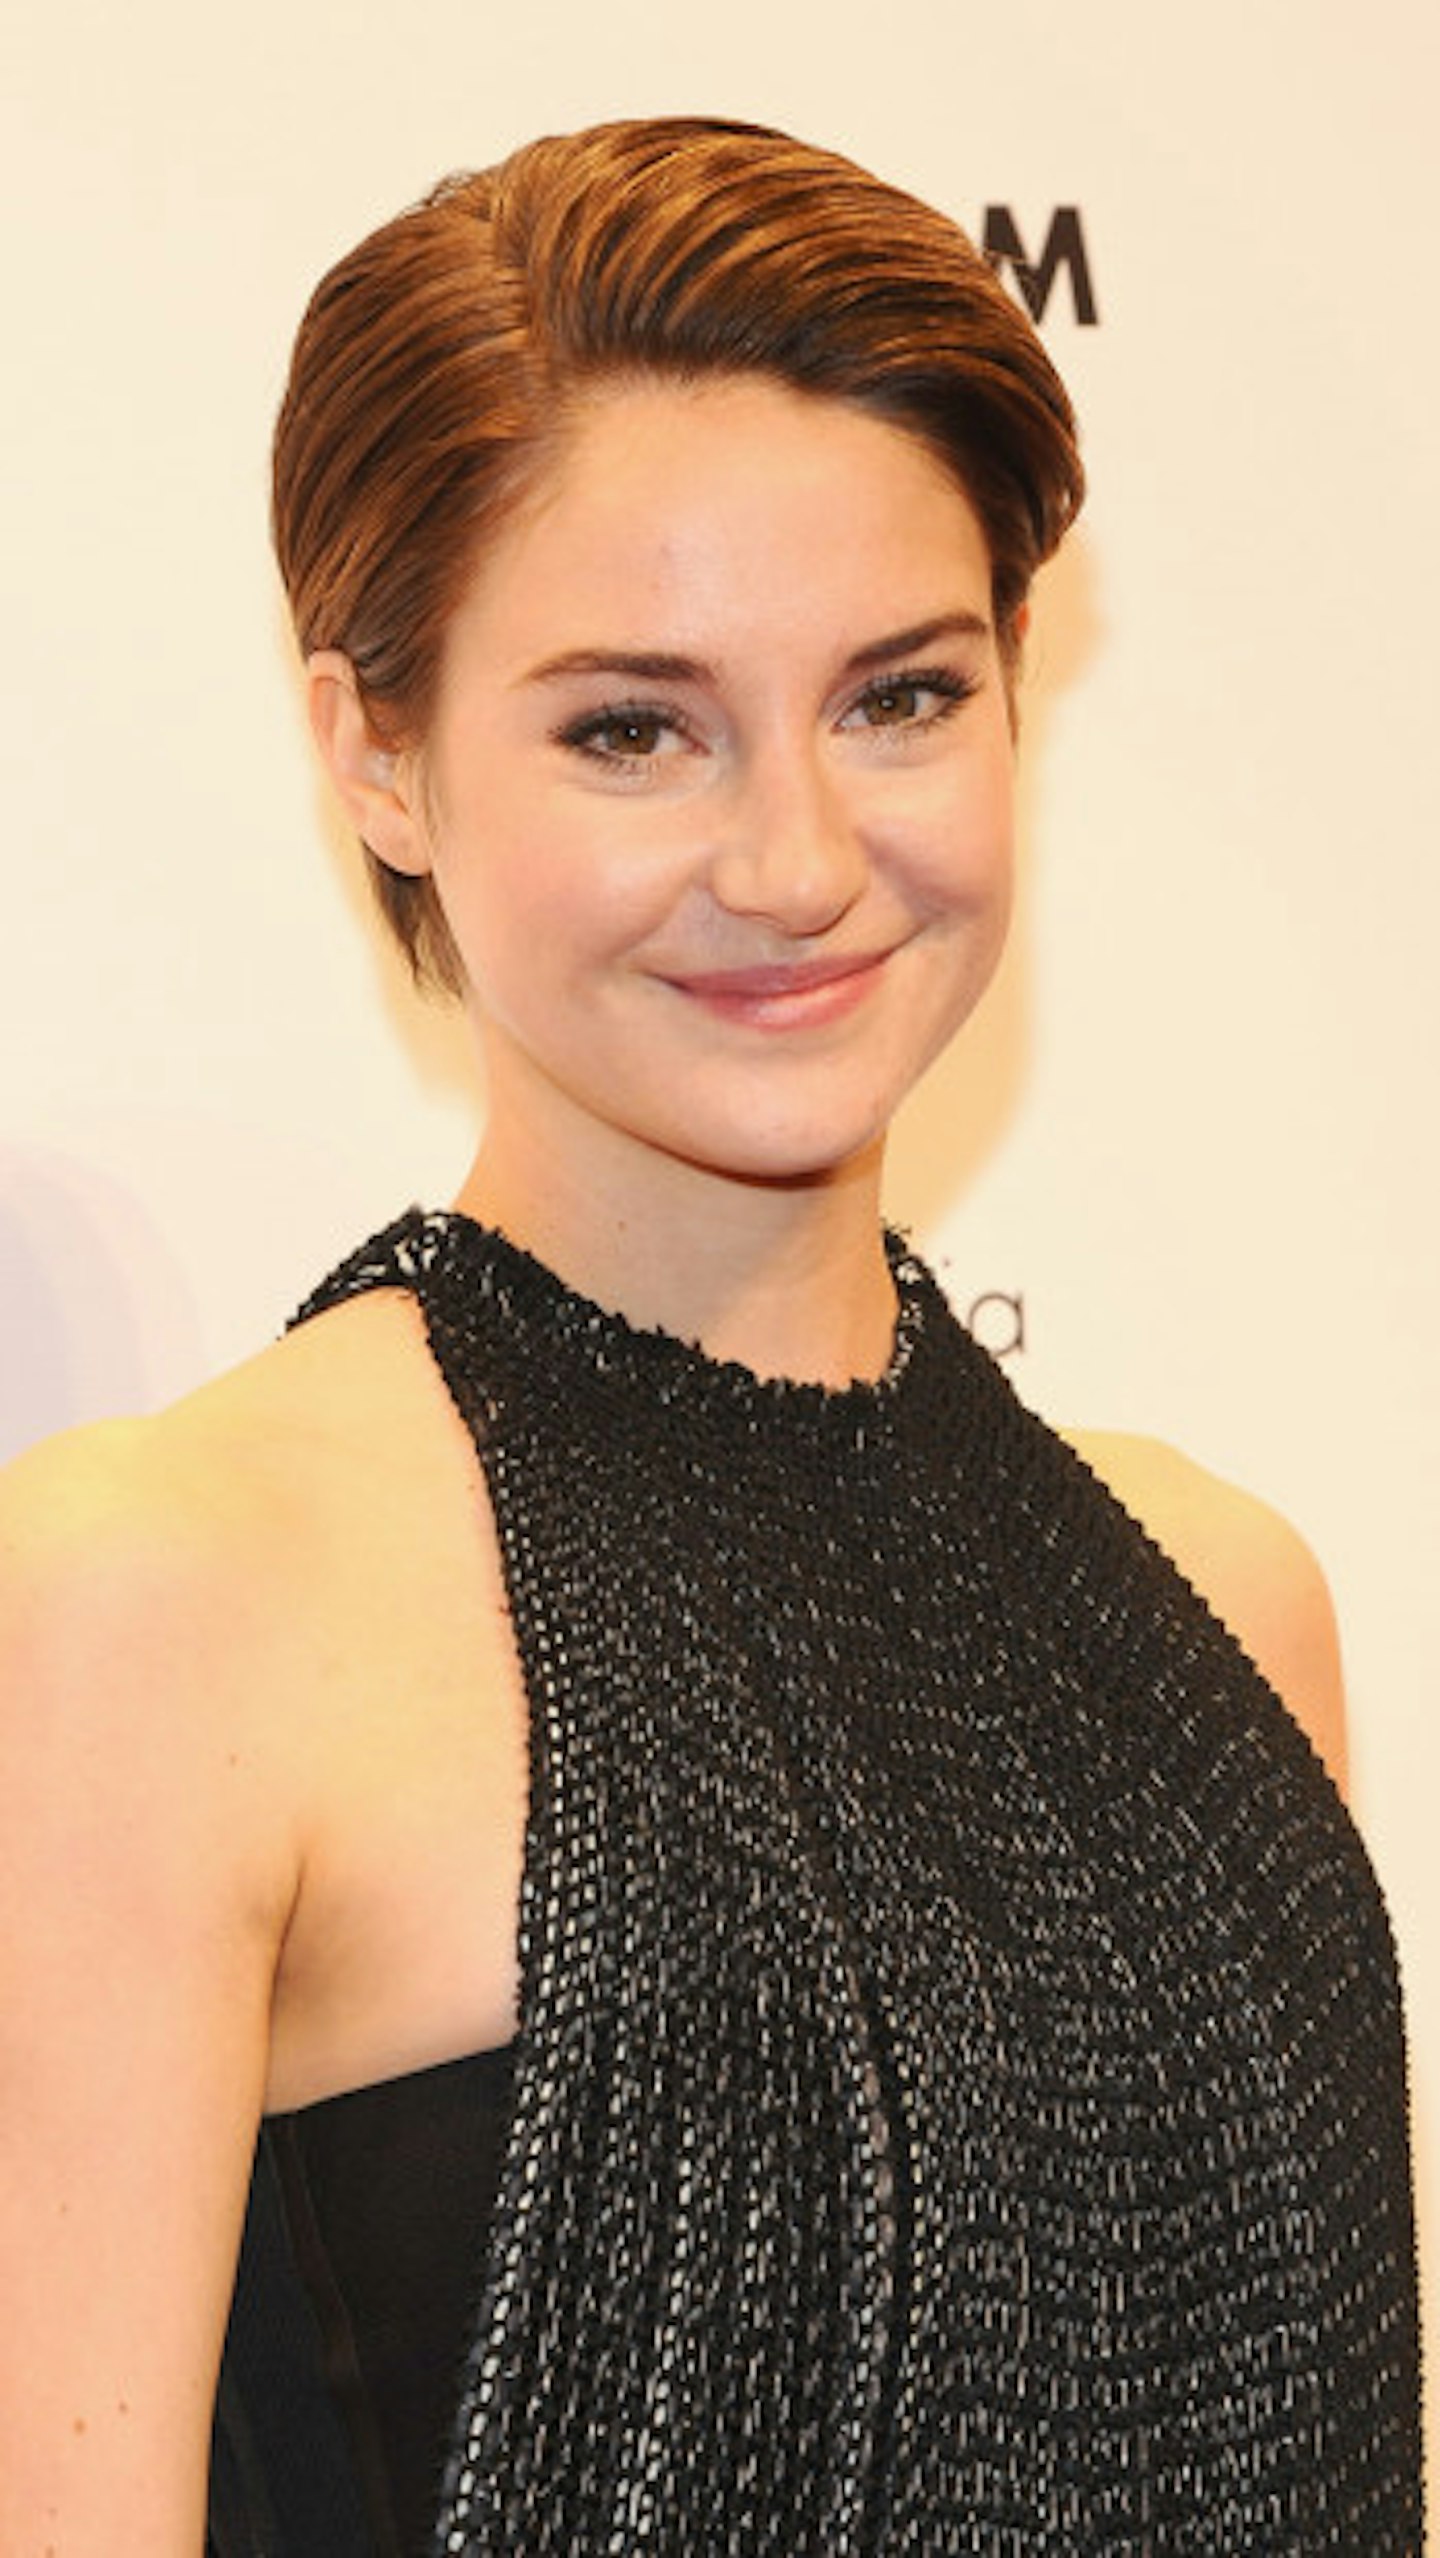 Shailene Woodley Wants To Star In A Musical And Play Stevie Nicks